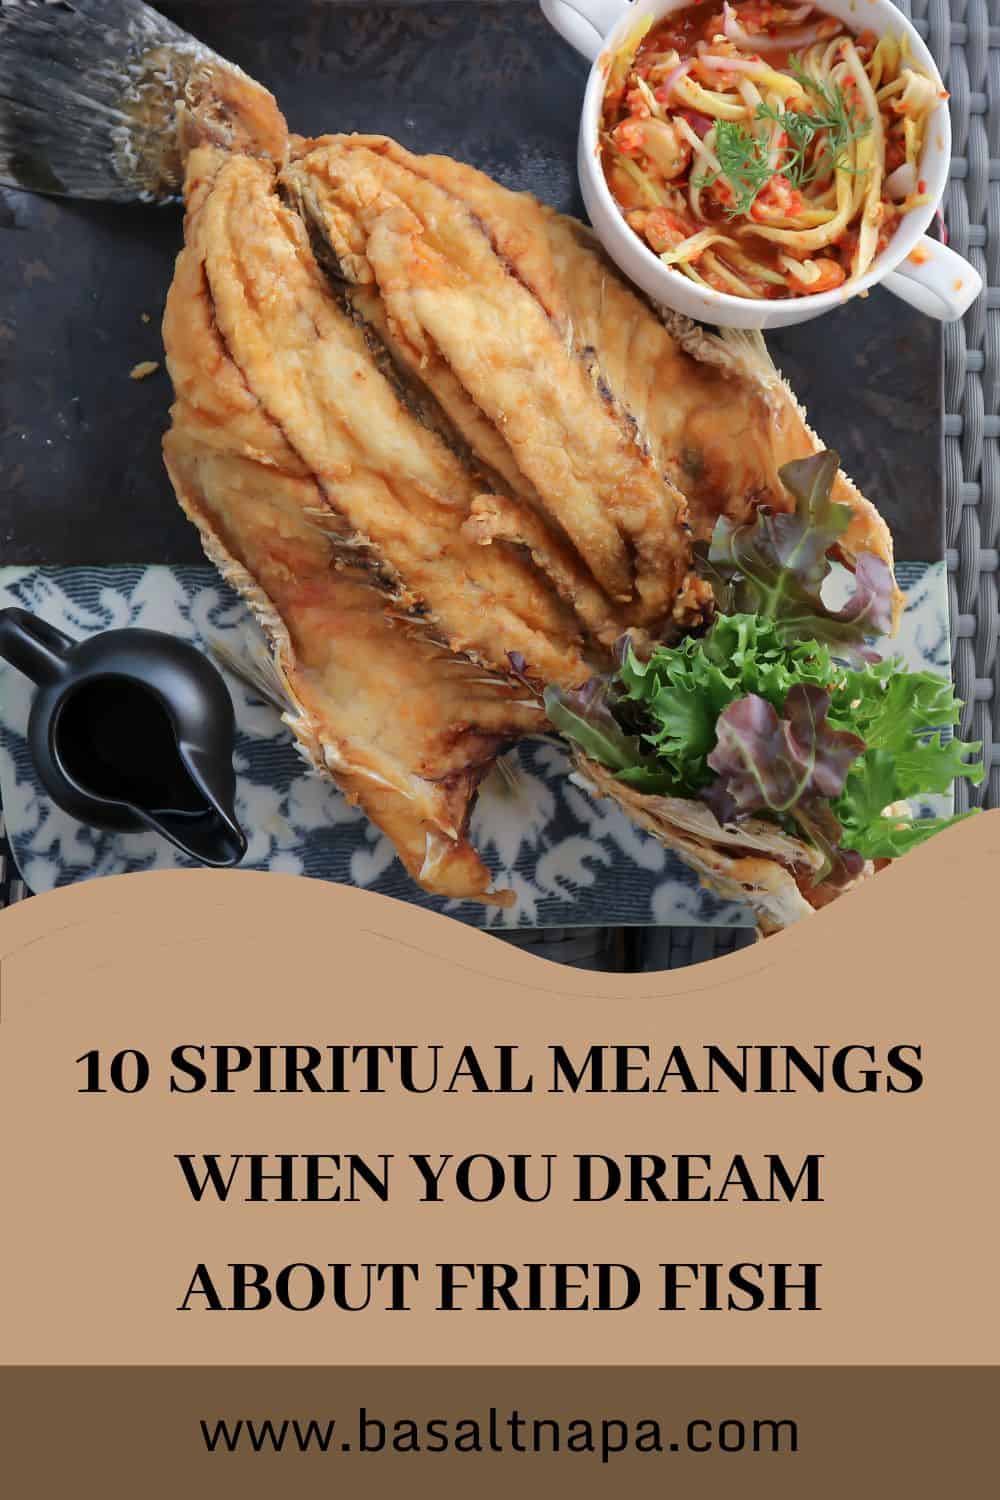 10 Spiritual Meanings When You Dream About Fried Fish